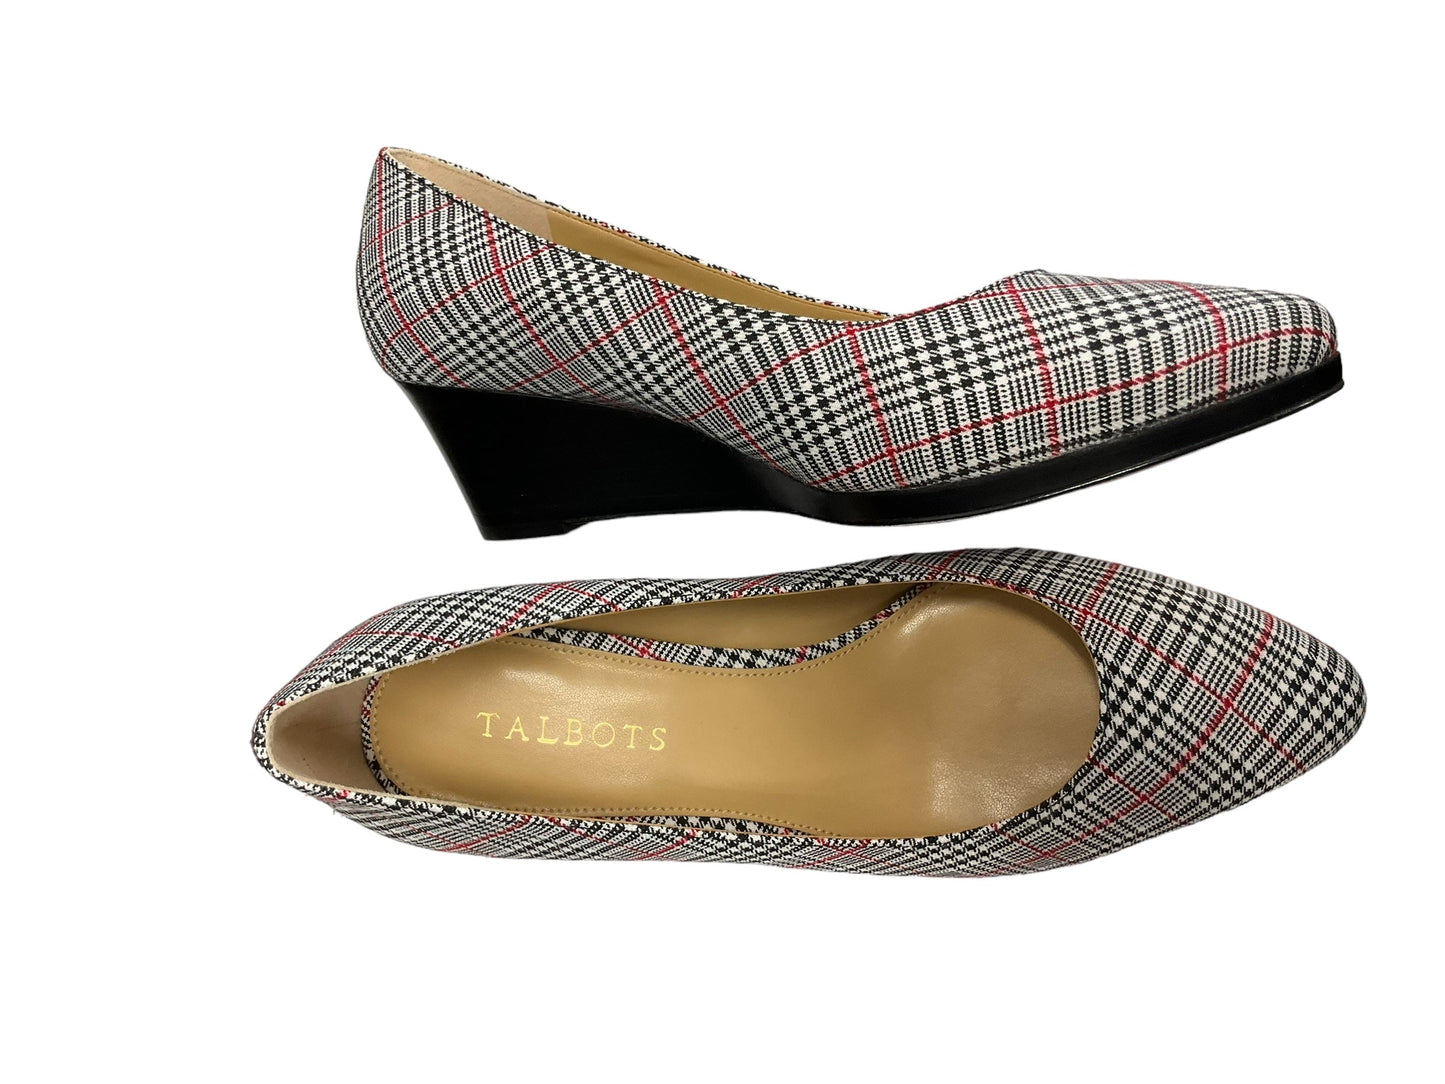 Plaid Pattern Shoes Heels Wedge Talbots, Size 8.5